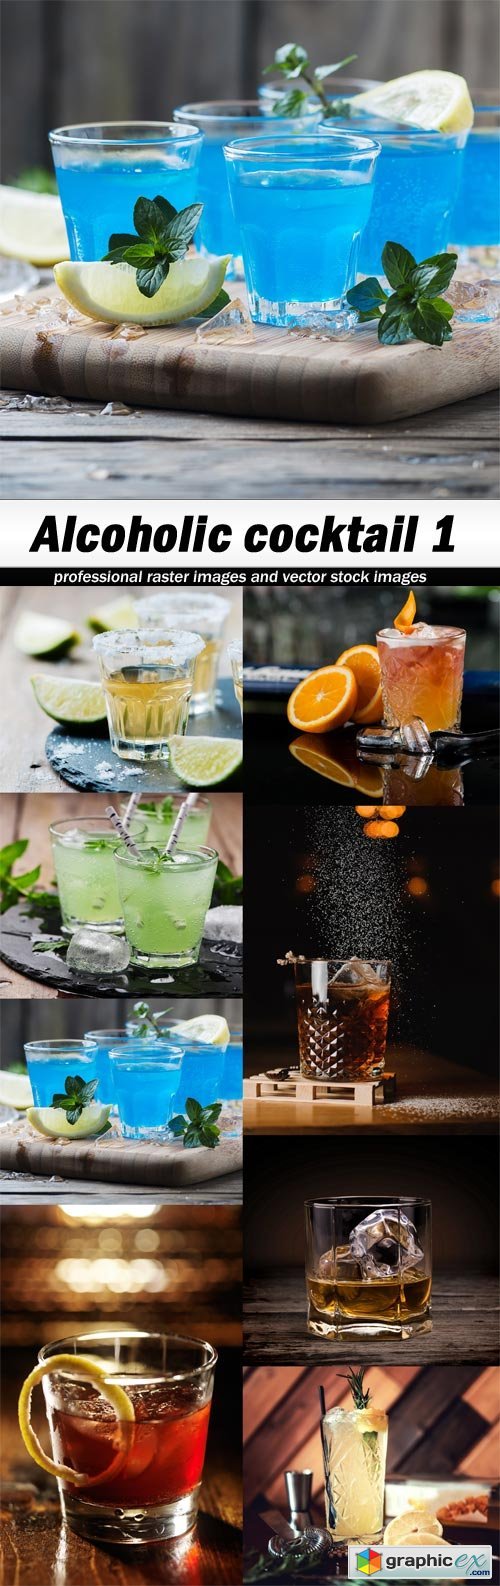 Alcoholic cocktail 1-8xJPEGs